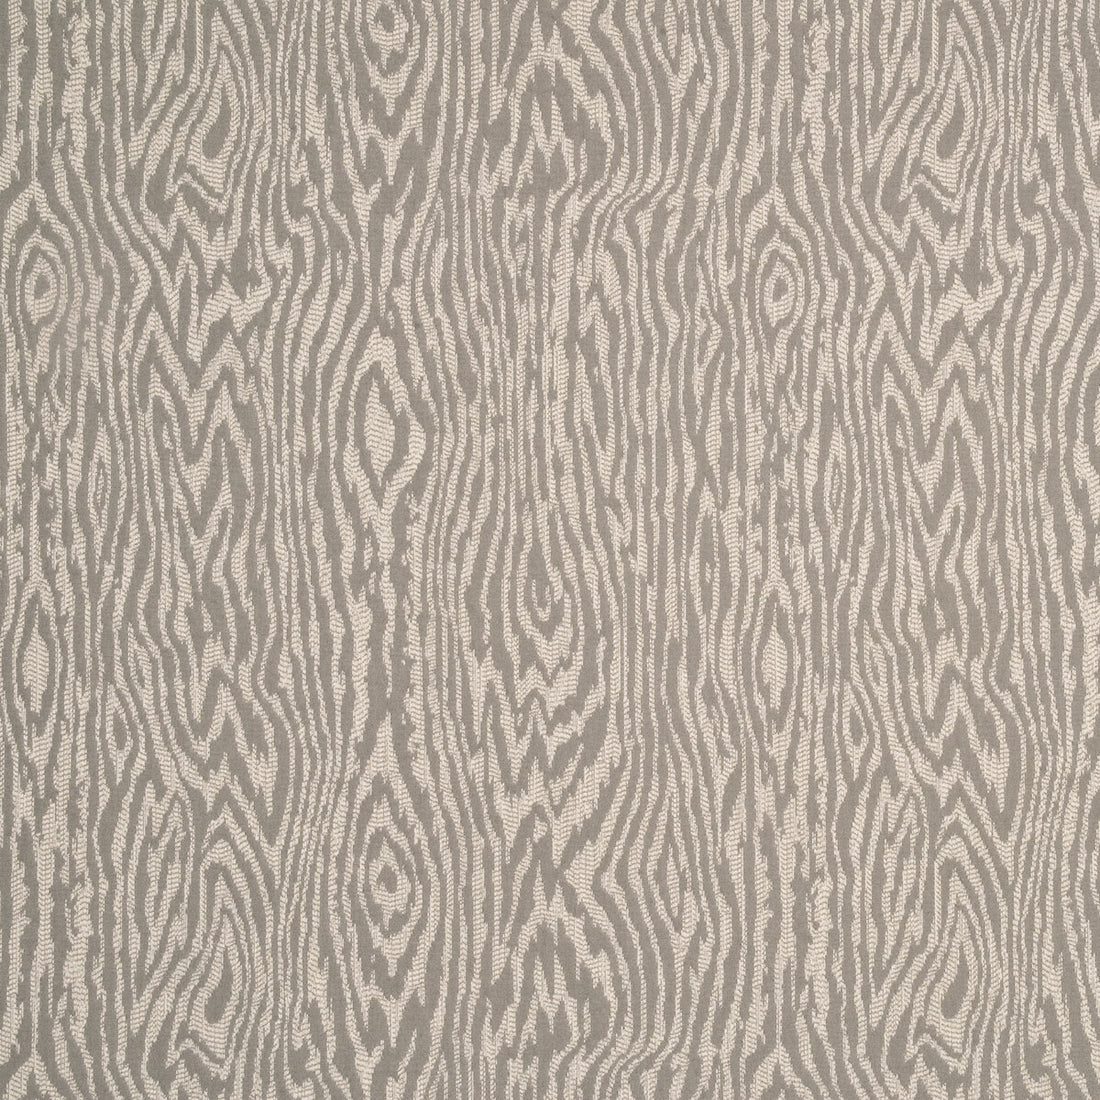 Maris fabric in stone color - pattern ED85196.140.0 - by Threads in the Threads Colour Library collection